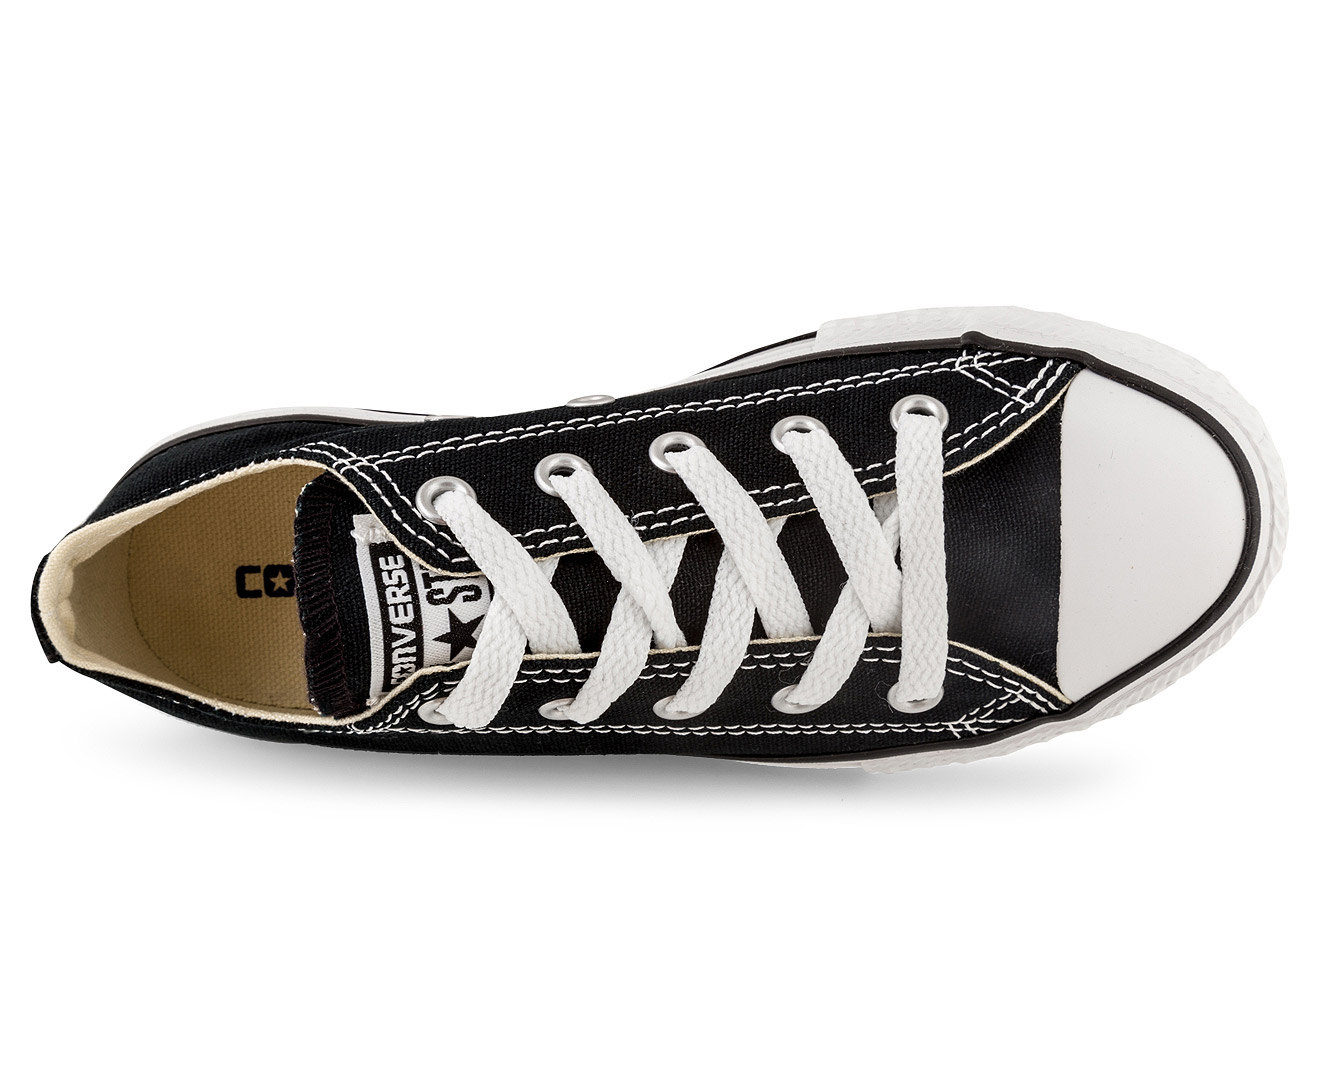 Converse Kids' Chuck Taylor All Star Low Top Sneakers - Black | Catch.co.nz